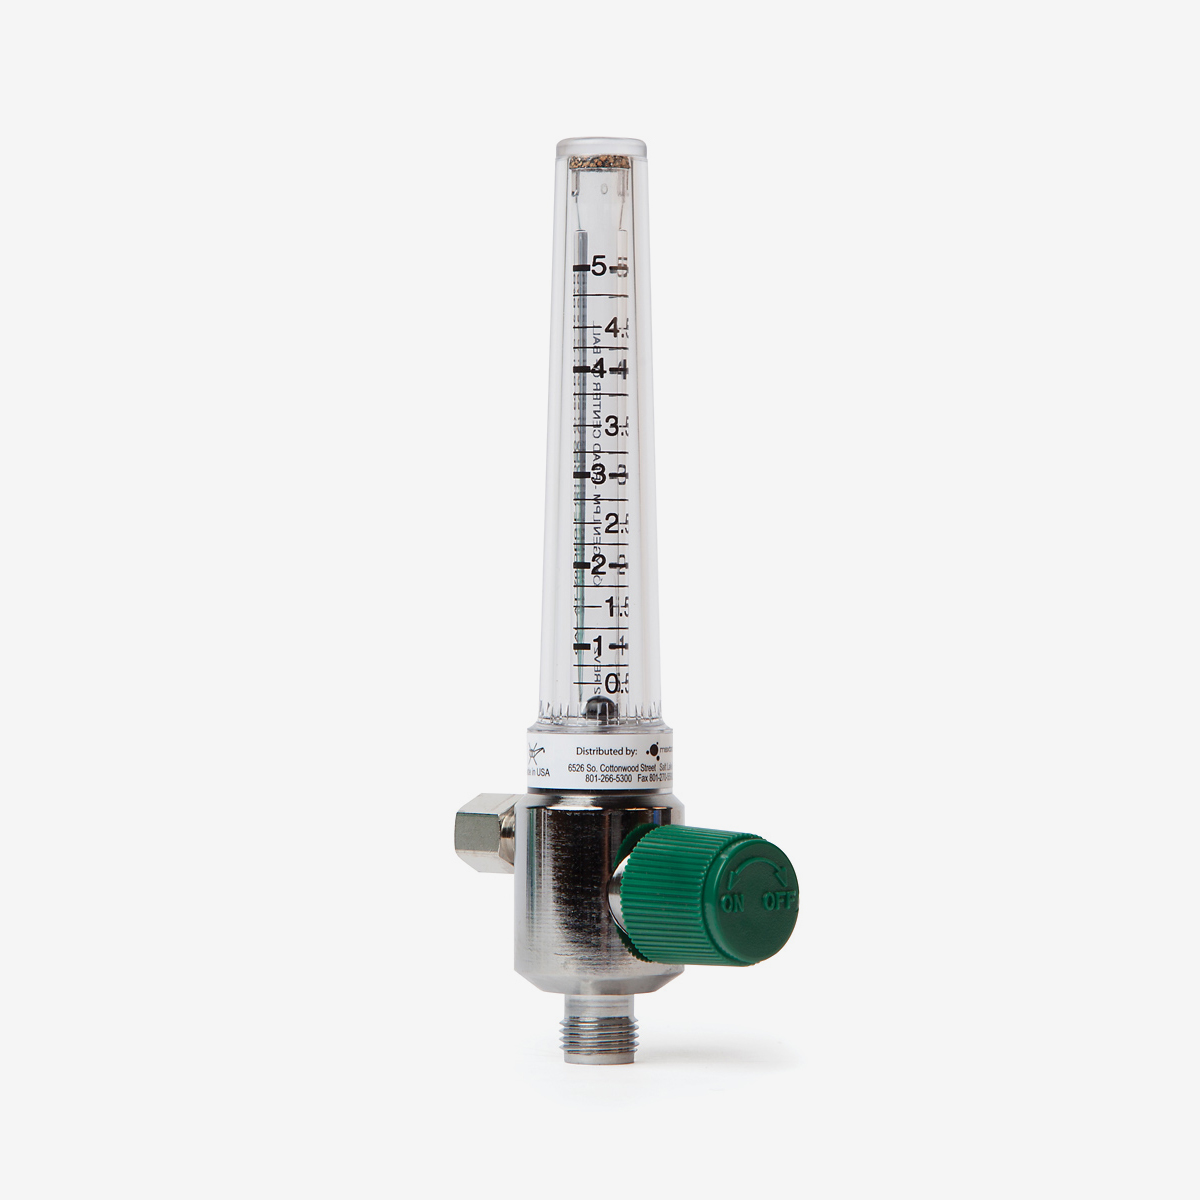 Angled view of 0-5 lpm flow meter with green knob